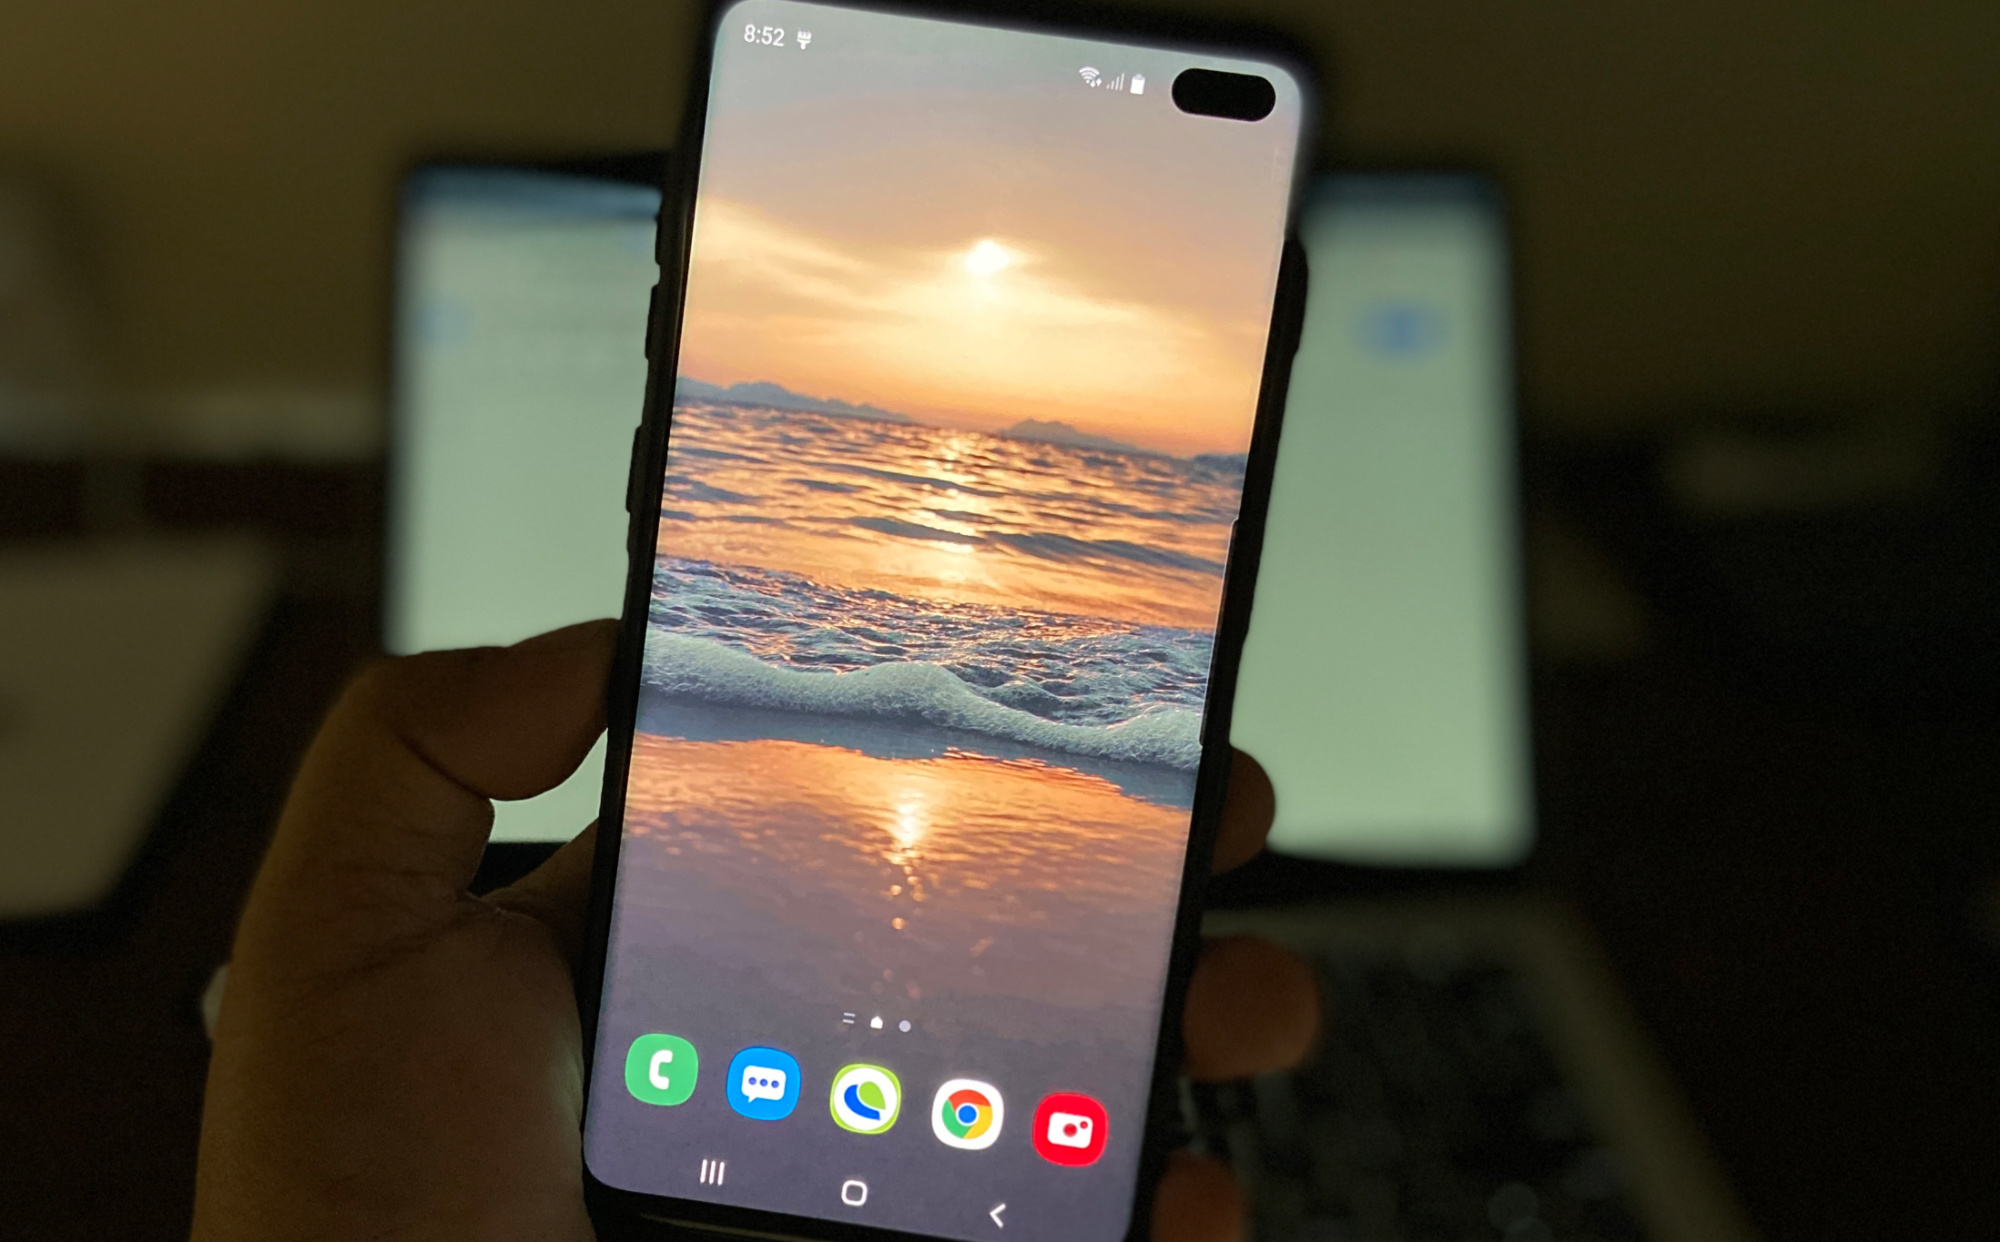 Fix a Galaxy S10 that randomly freezes after Android 10